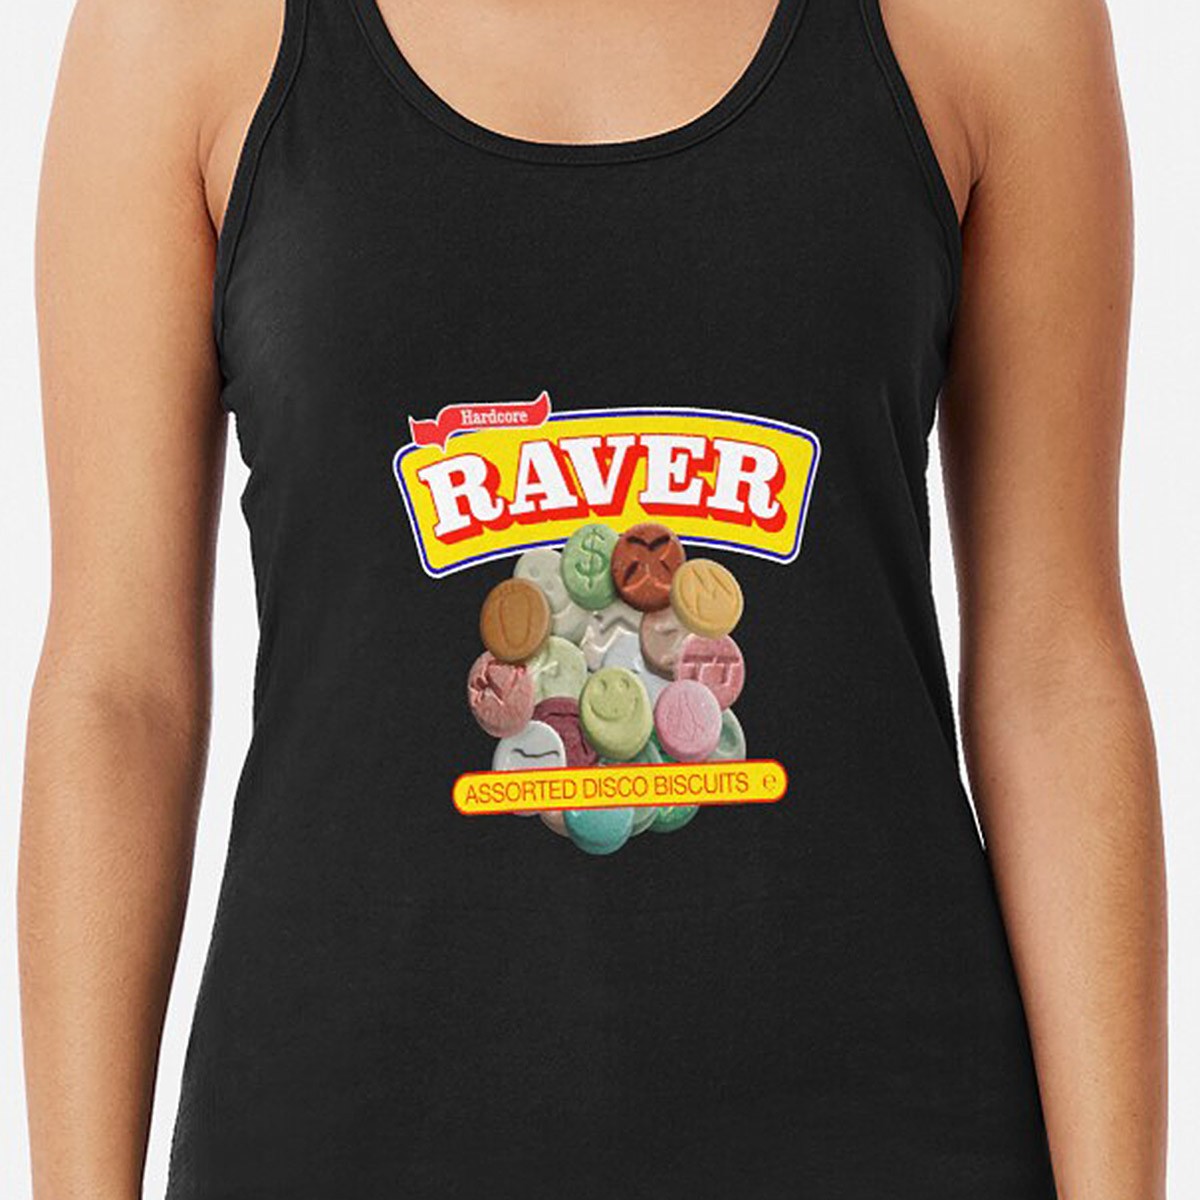 Hardcore Raver - Assorted Disco Biscuits - Racerback Tank Top by NTK Apparel